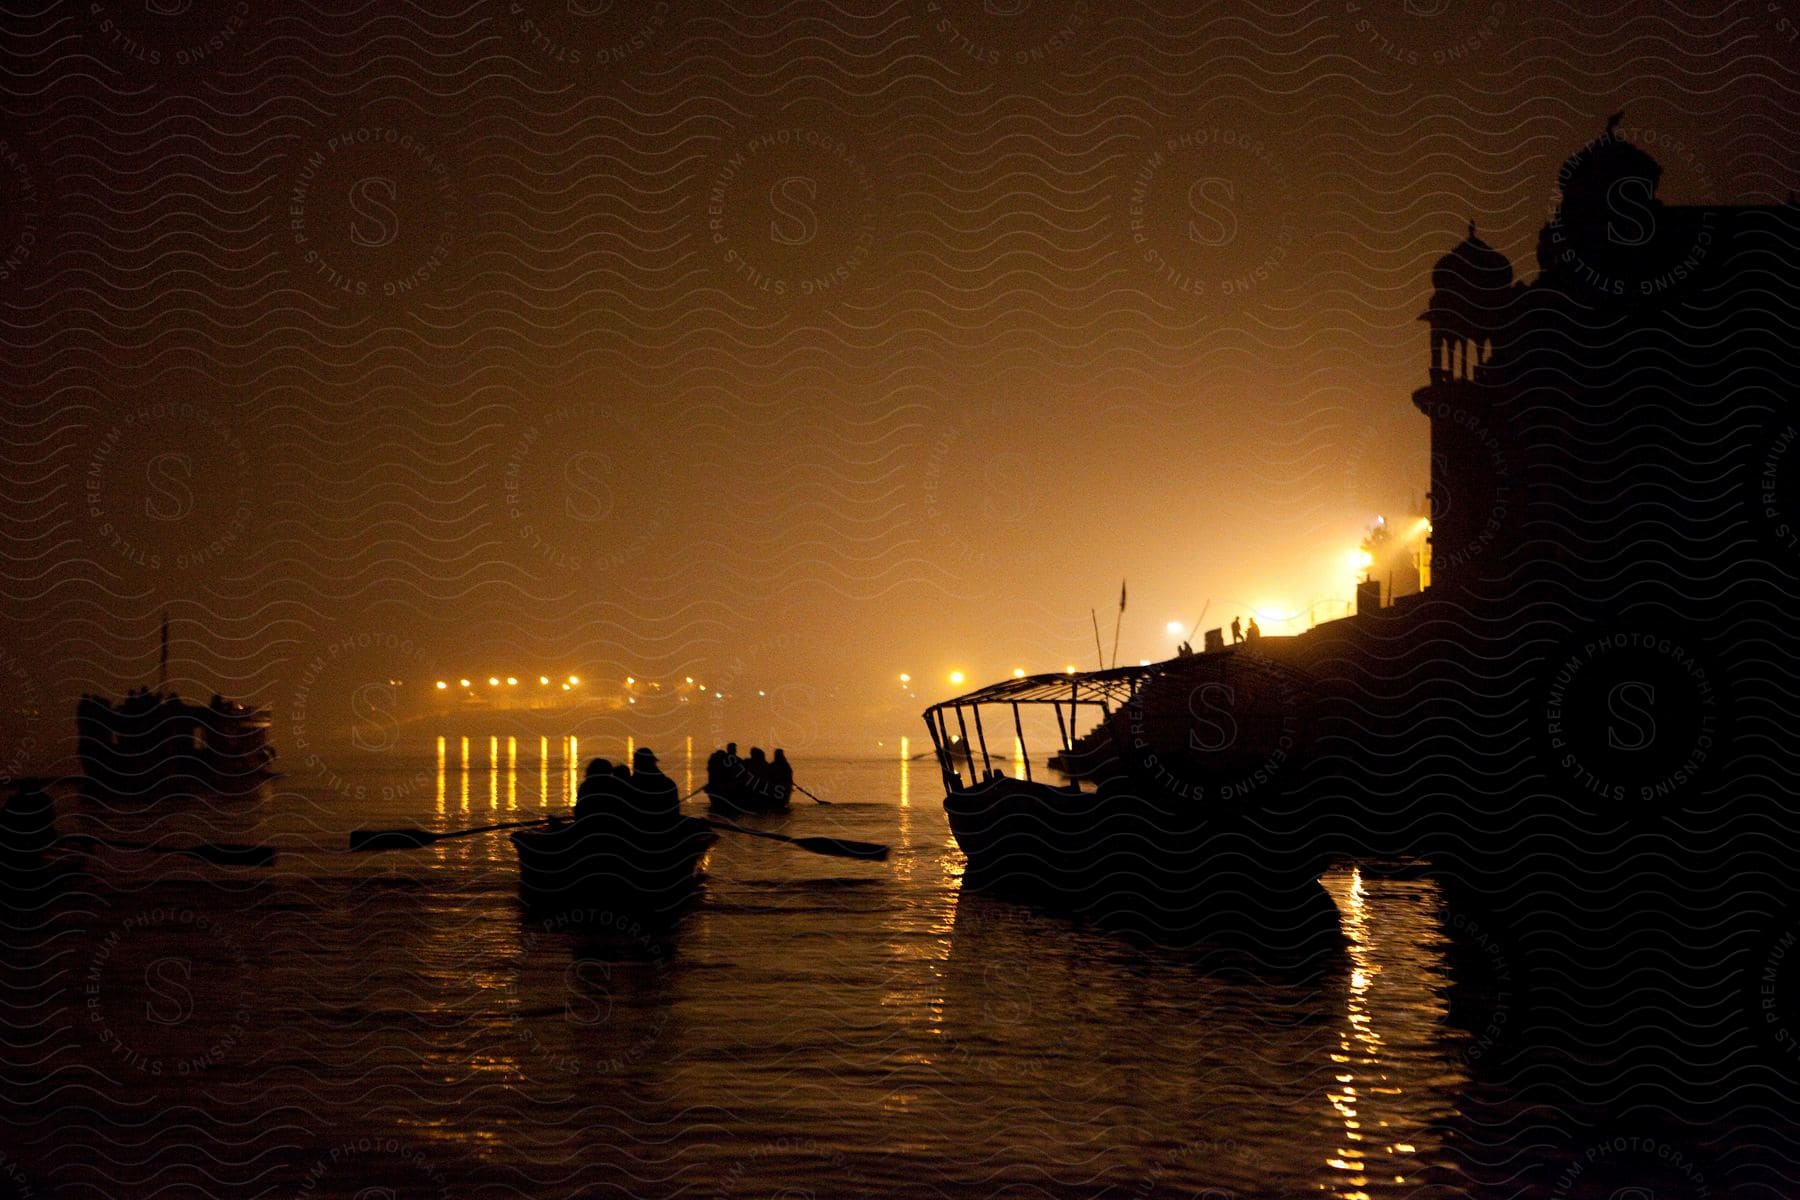 Rowboats with people inside passing next to the coast of a city at night